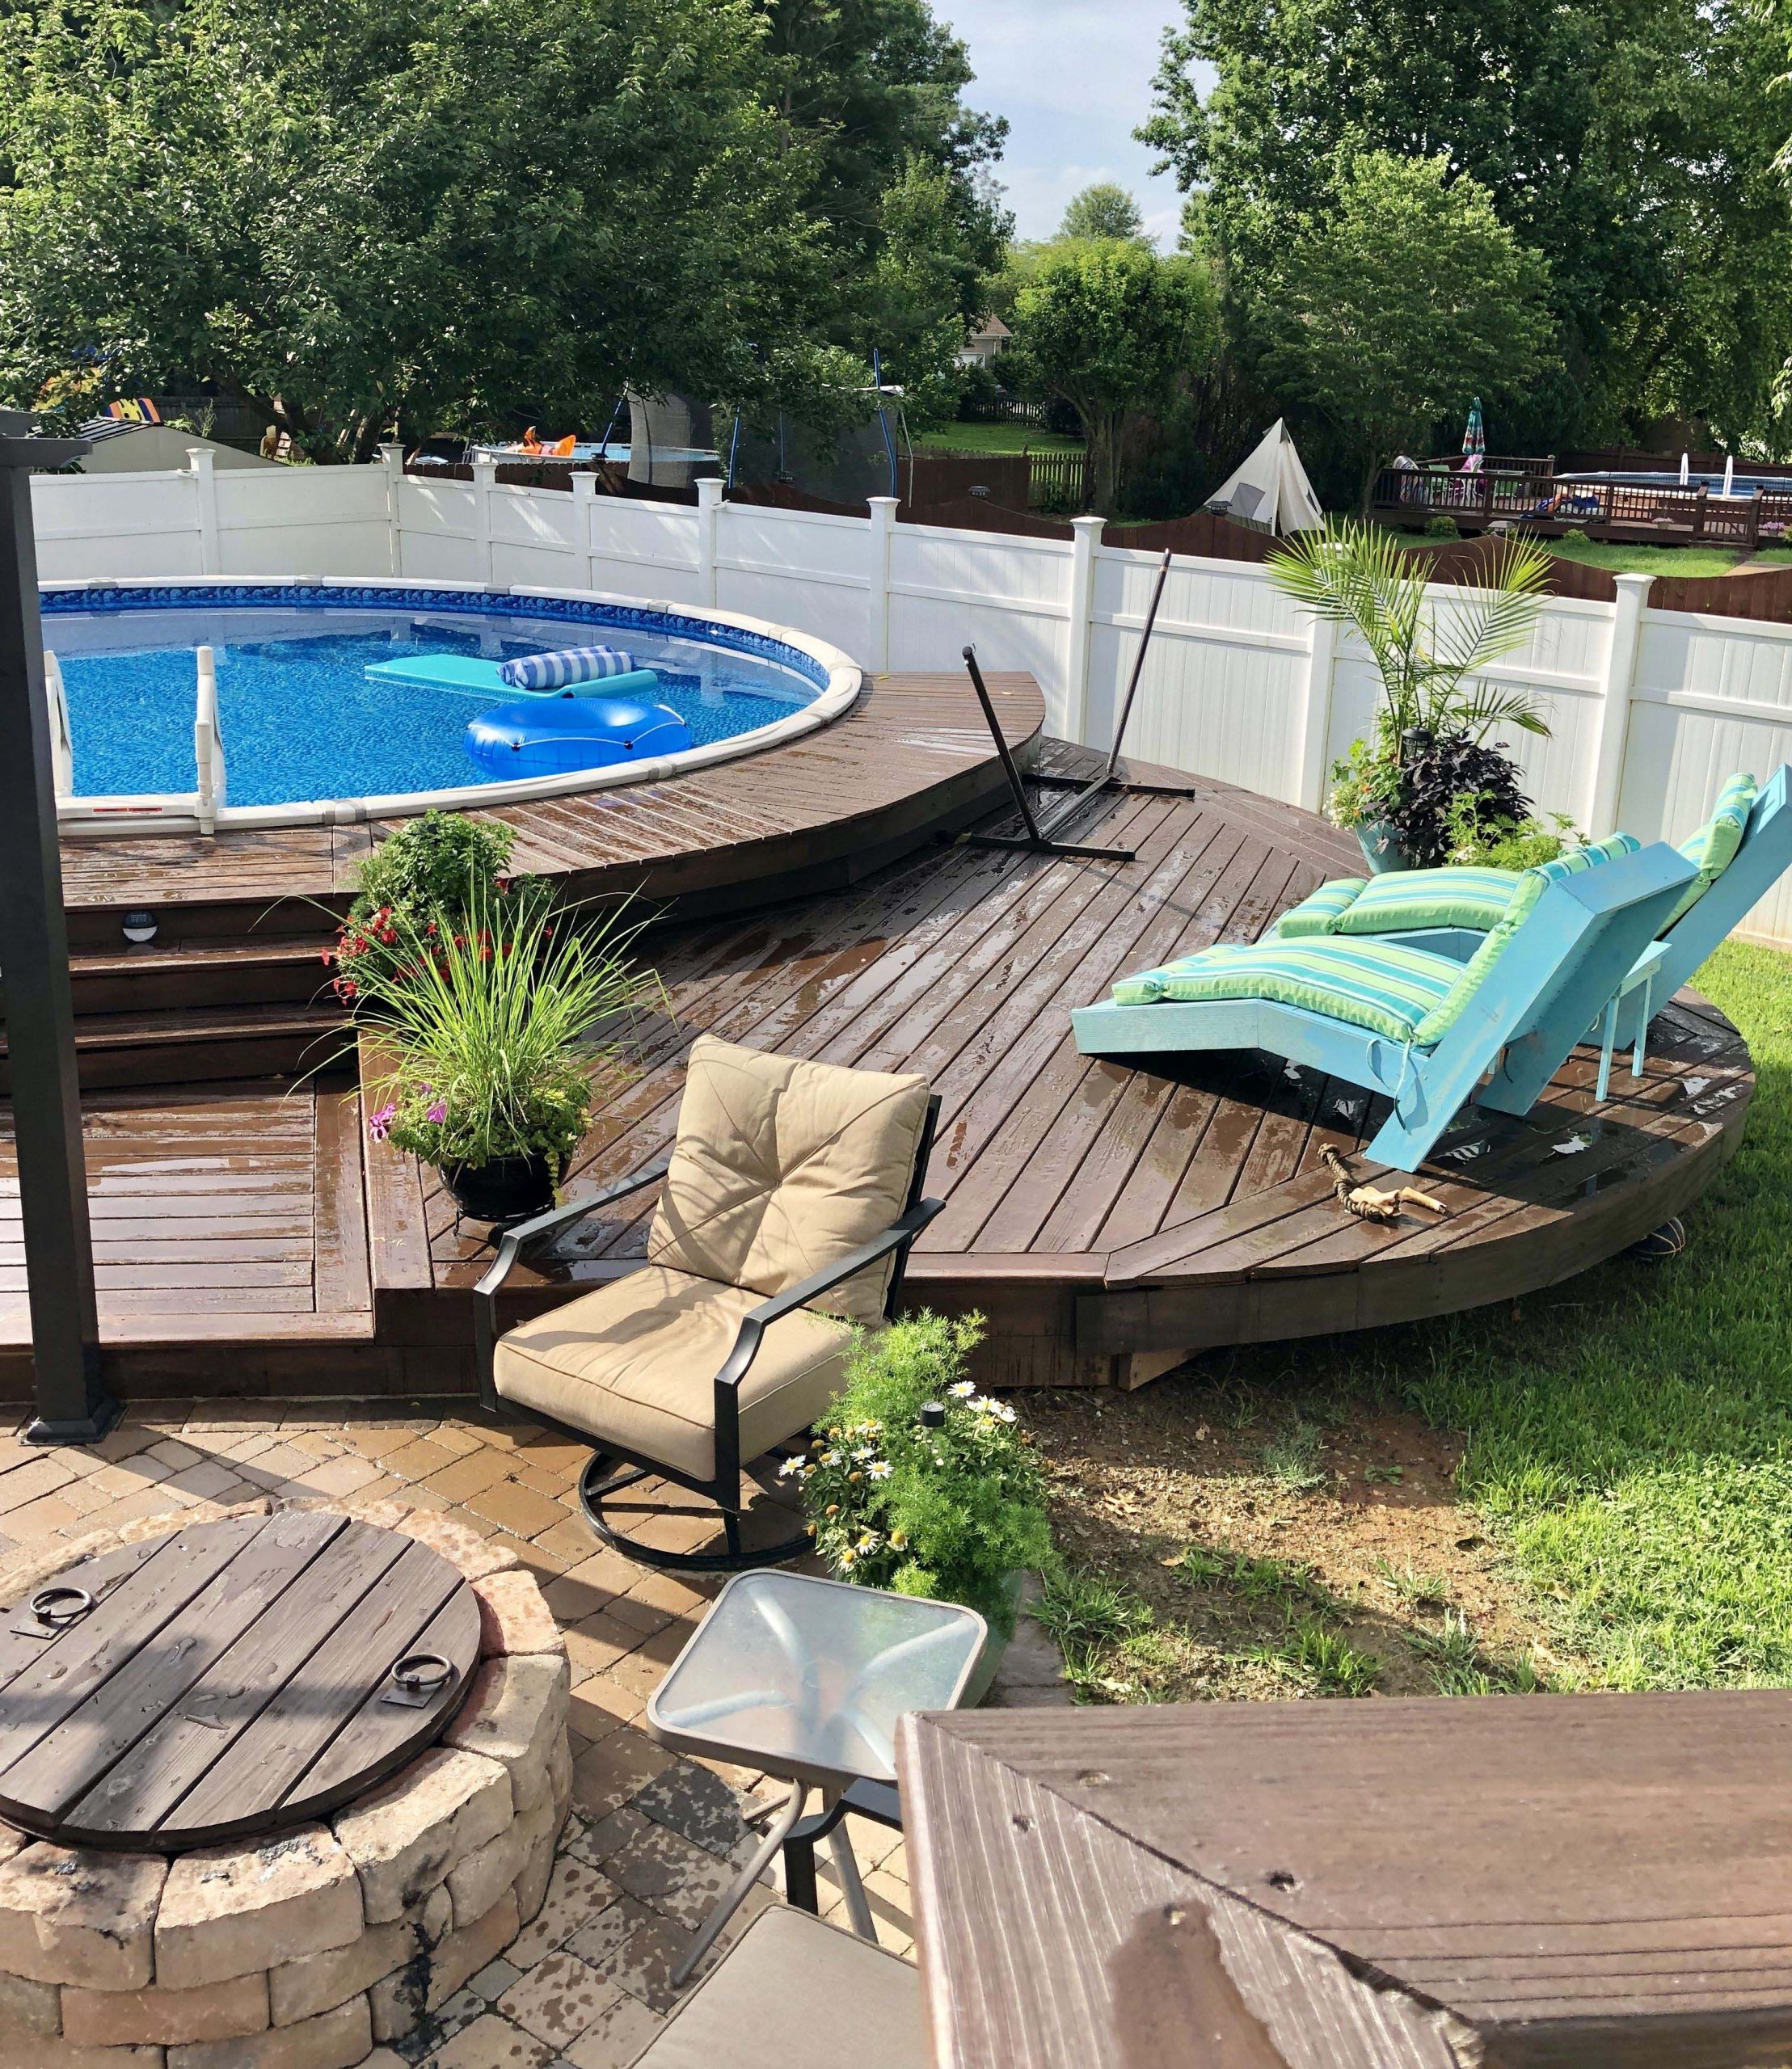 How To Open An Above Ground Pool For The First Time?